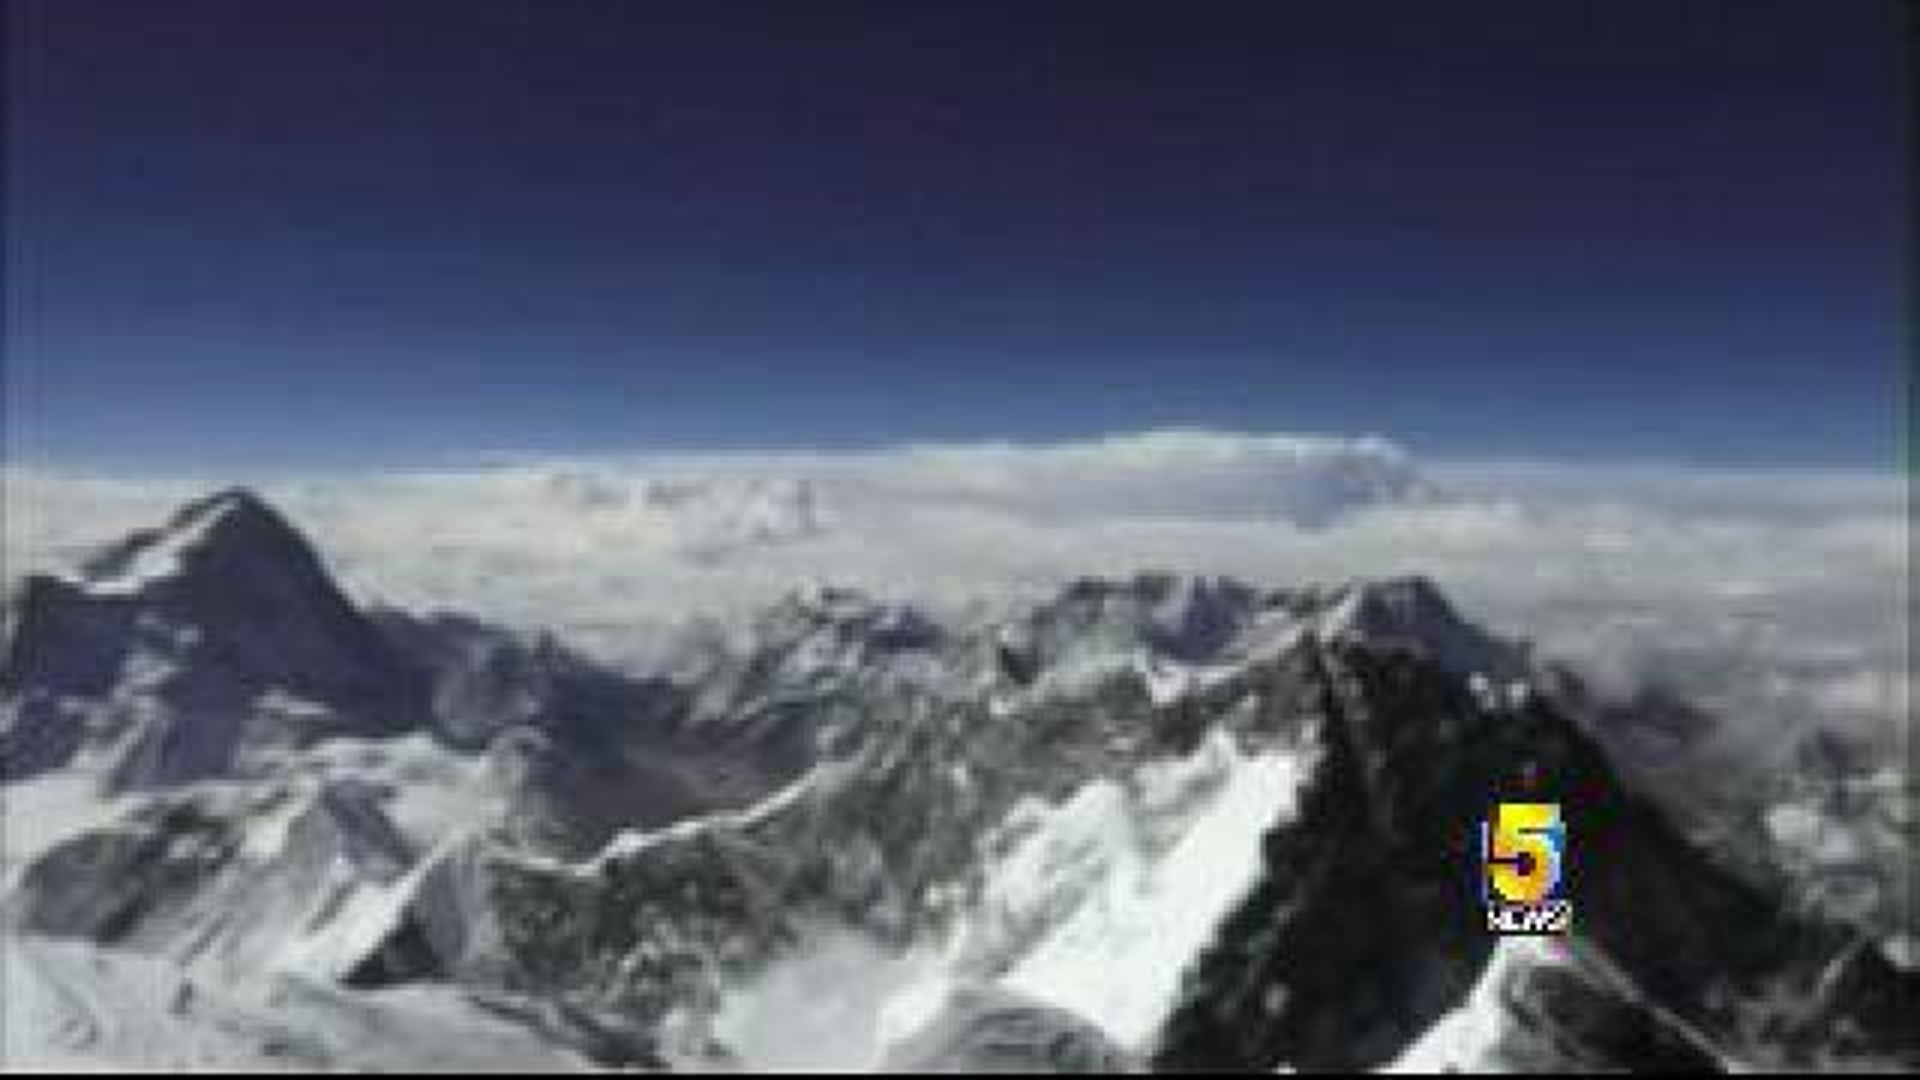 12 Killed in Mount Everest Avalanche